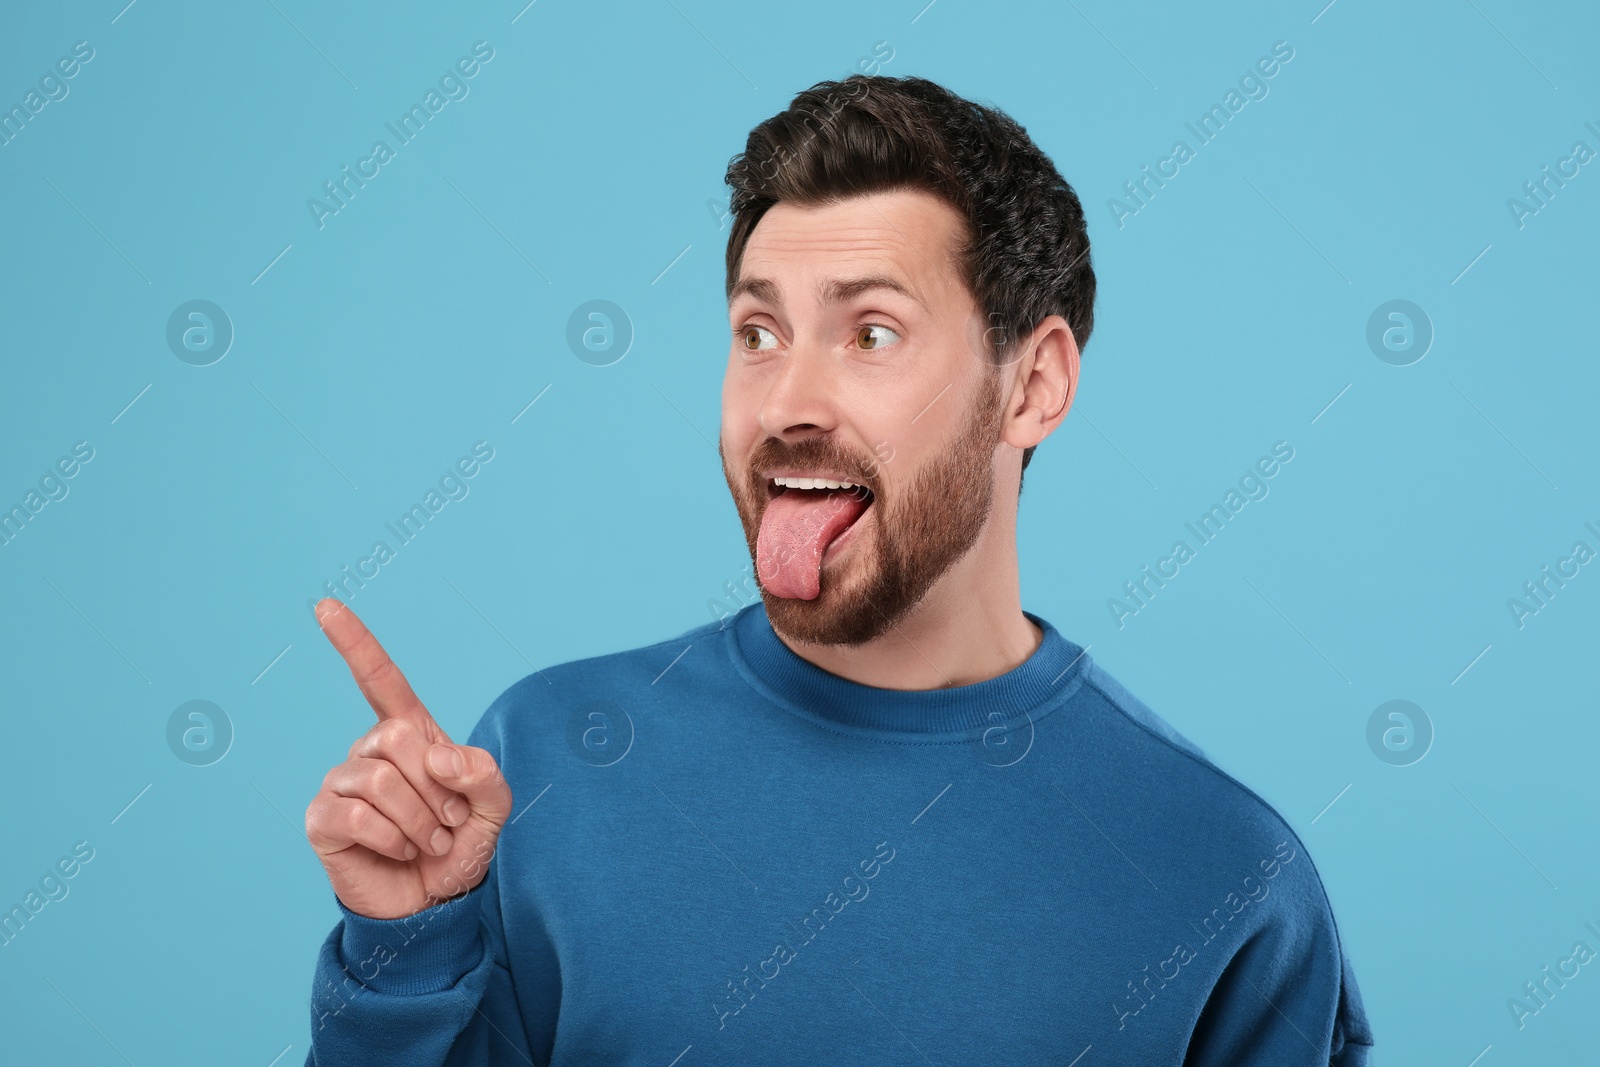 Photo of Man showing his tongue and pointing at something on light blue background